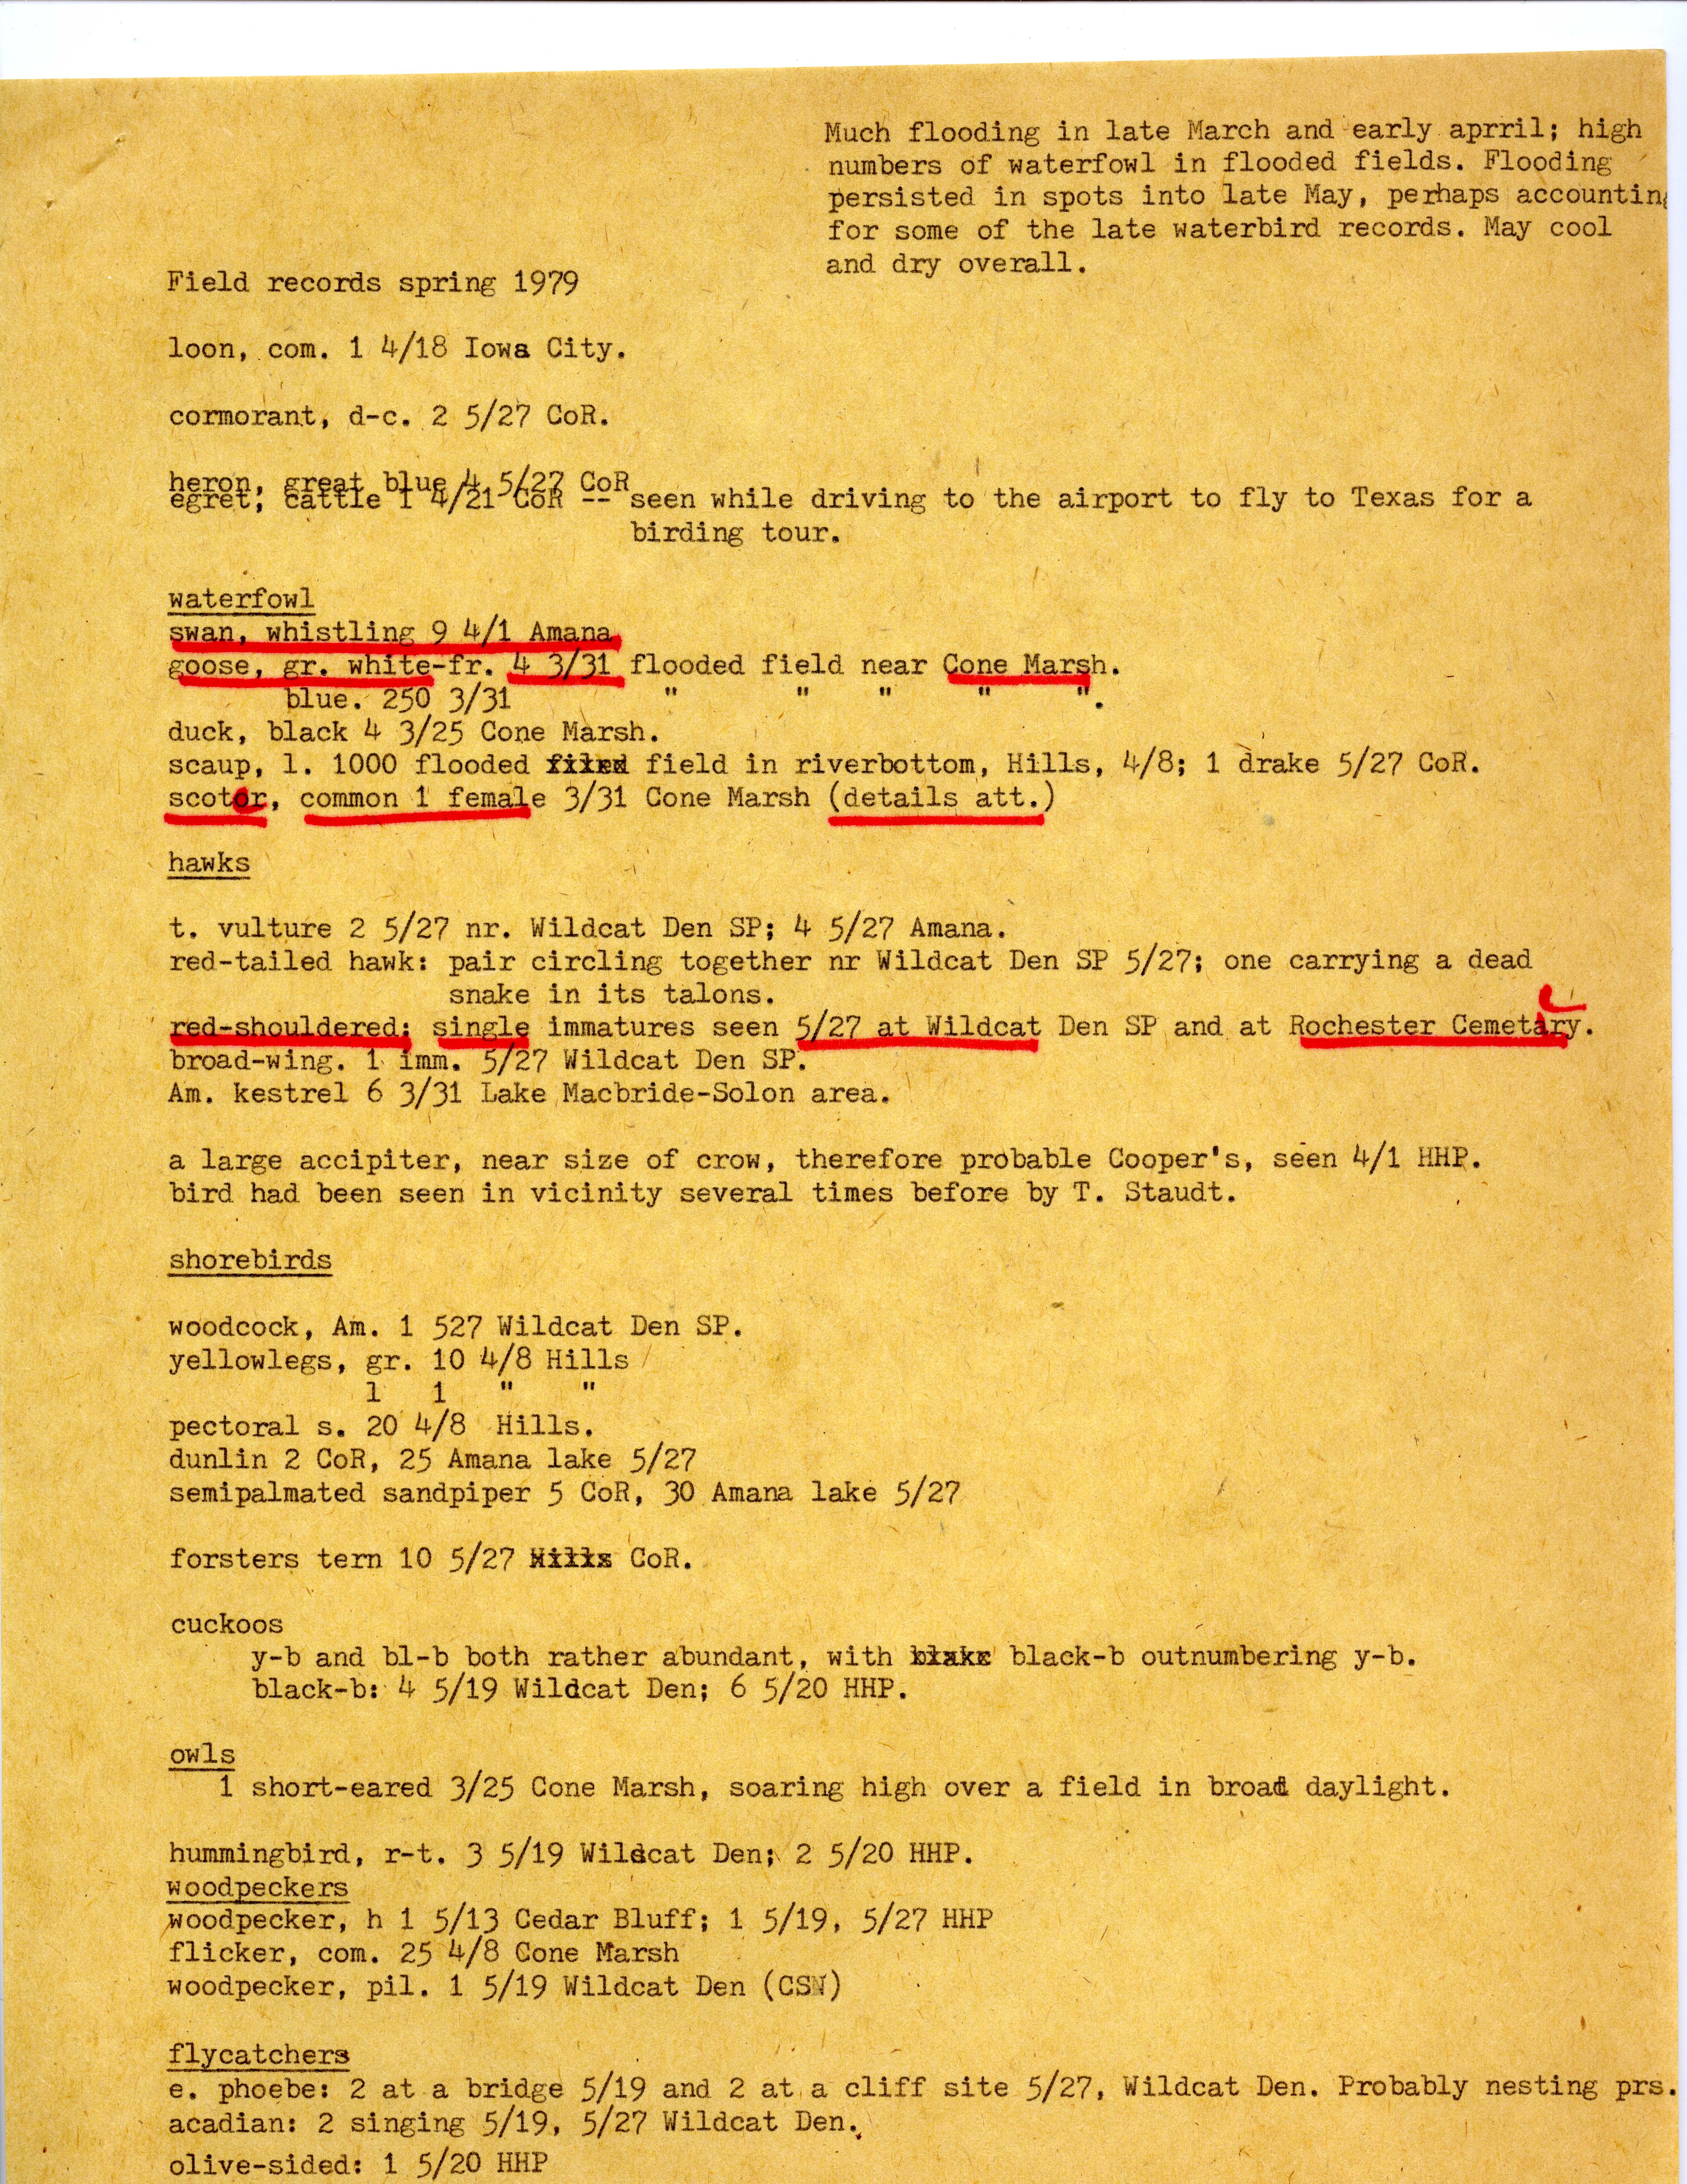 Field notes contributed by Michael C. Newlon, spring 1979